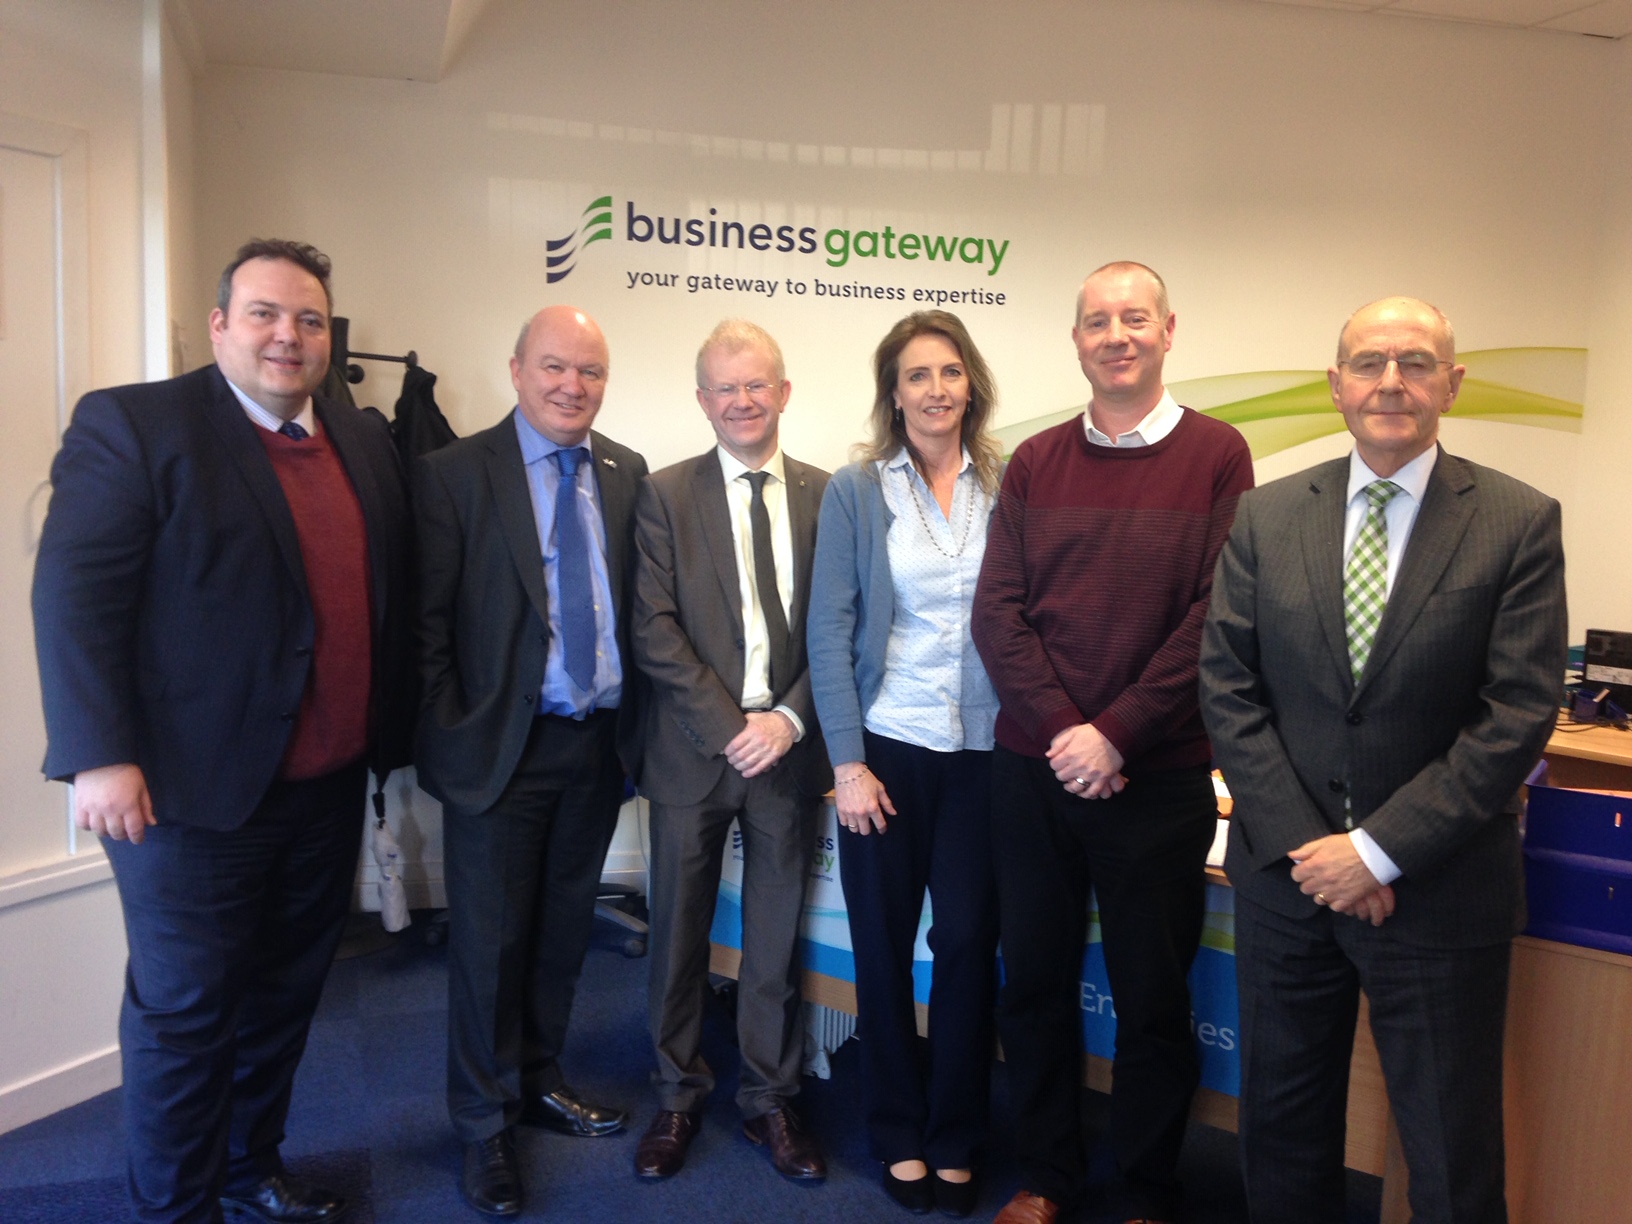 Jamie Halcro Johnston, John Mason and Gordon MacDonald visited Business Gateway Inverness as part of the Committee's Highland visit